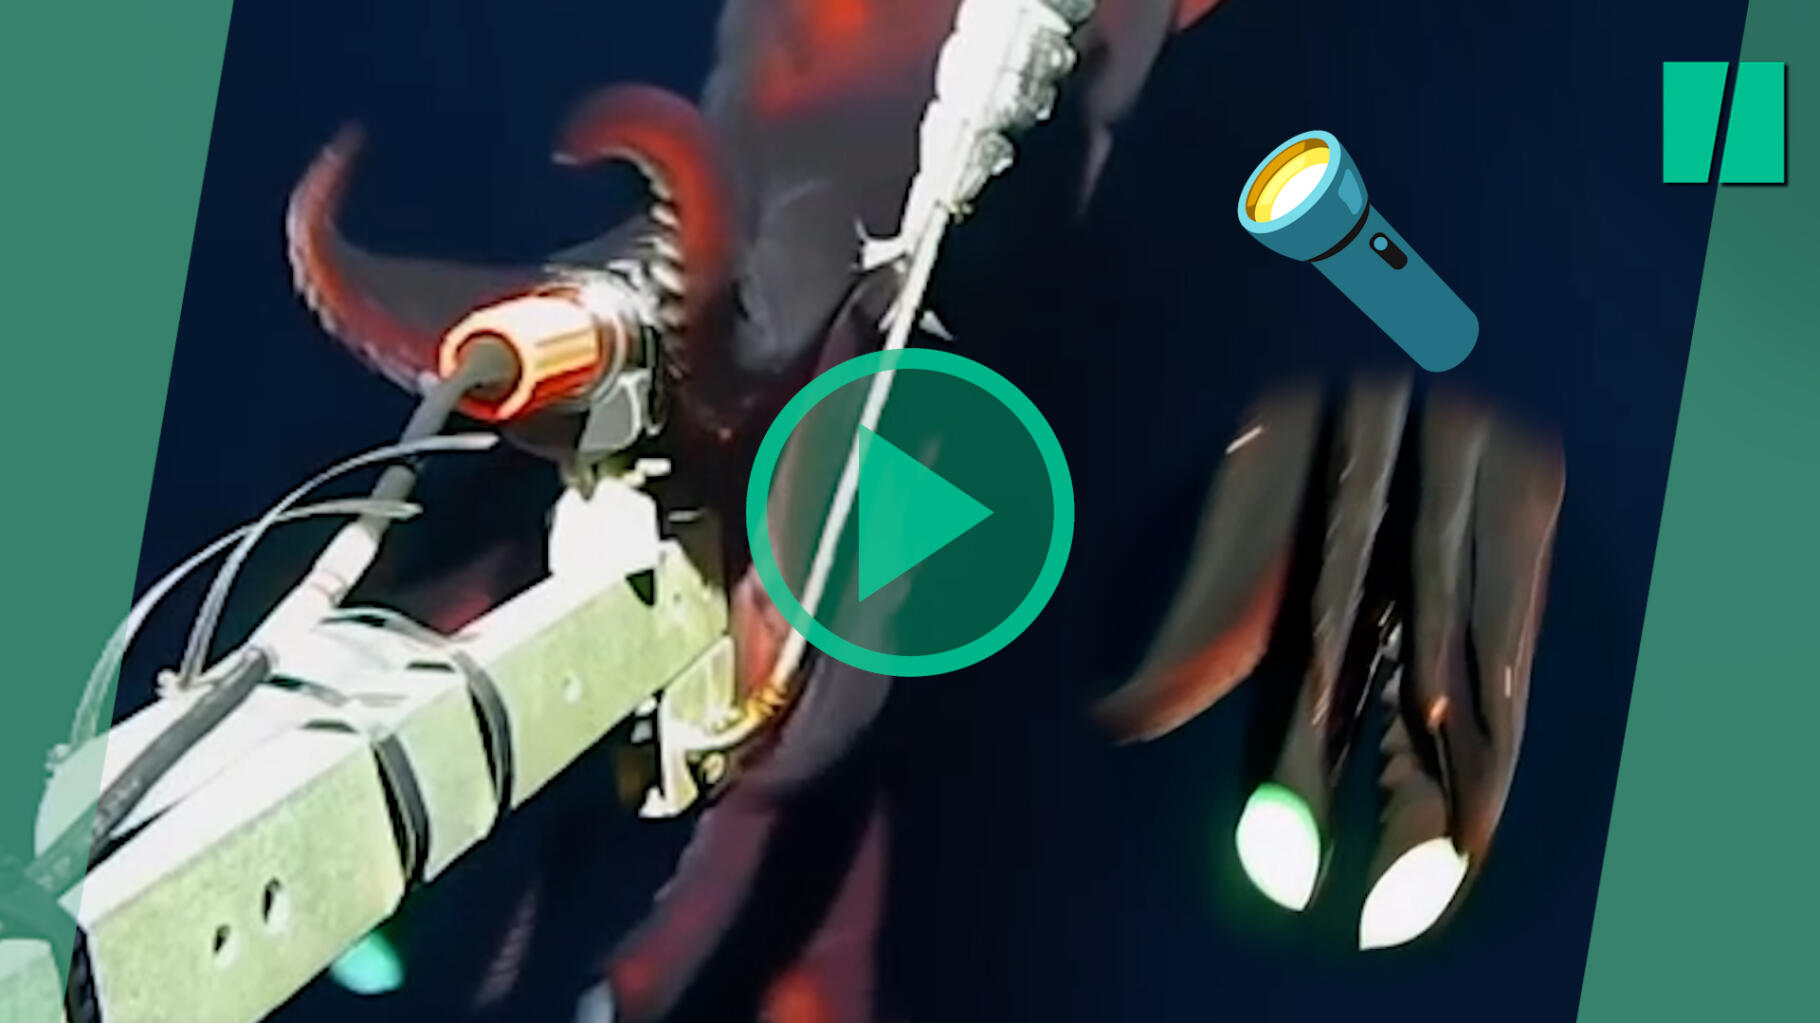 This huge squid is armed with real “flashlights” when it attacks